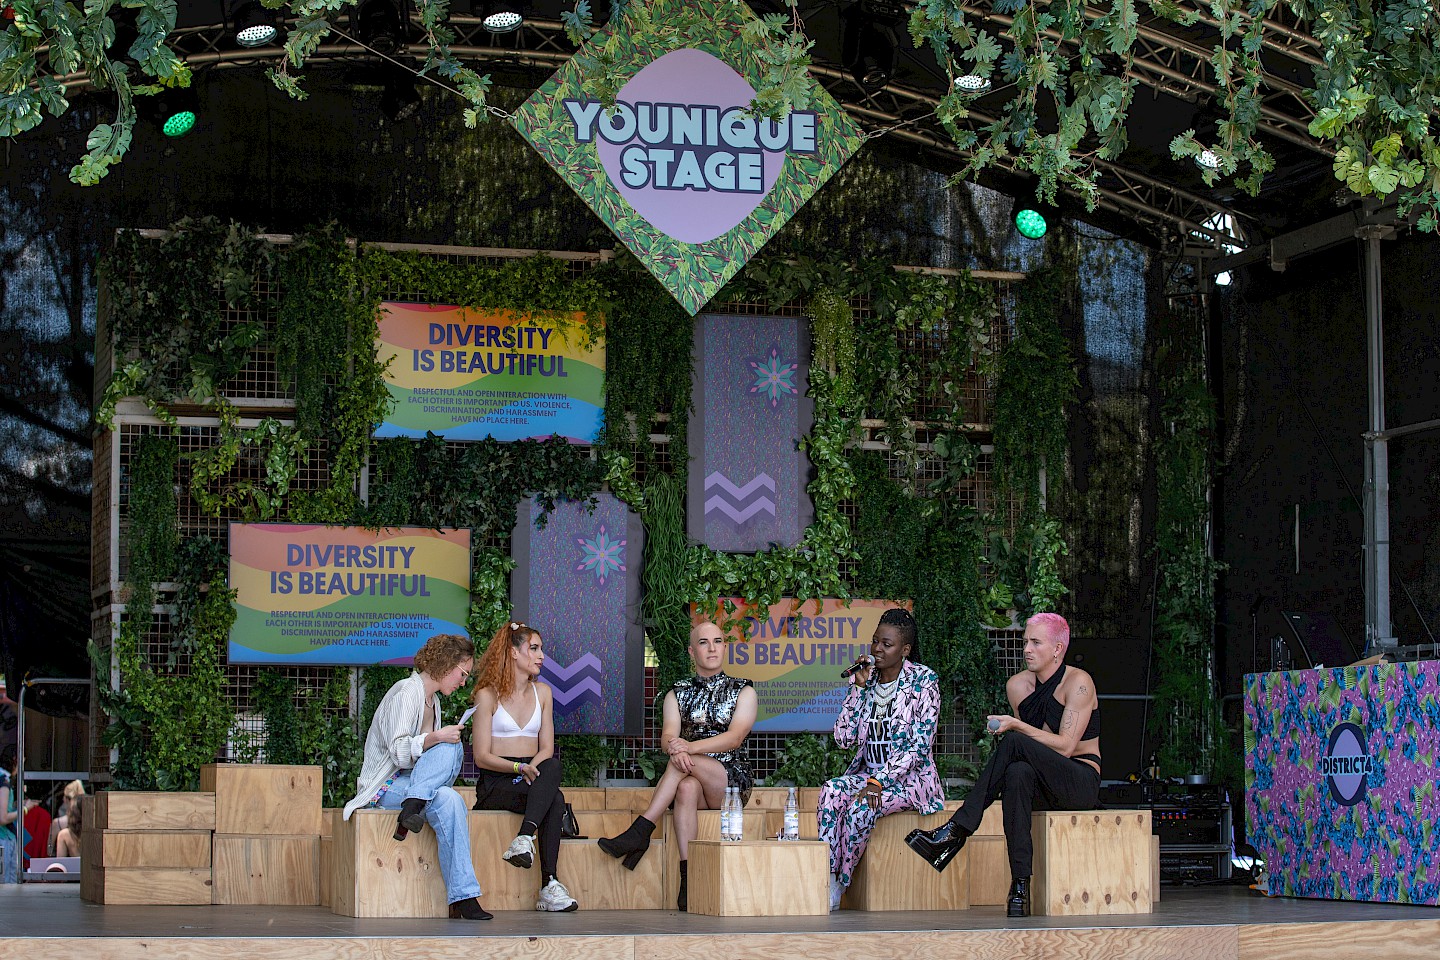 Four people are sitting on a stage and talking in a panel, behind them is a wall covered with green plants on which there is a screen with the text "Diversity is beautiful".